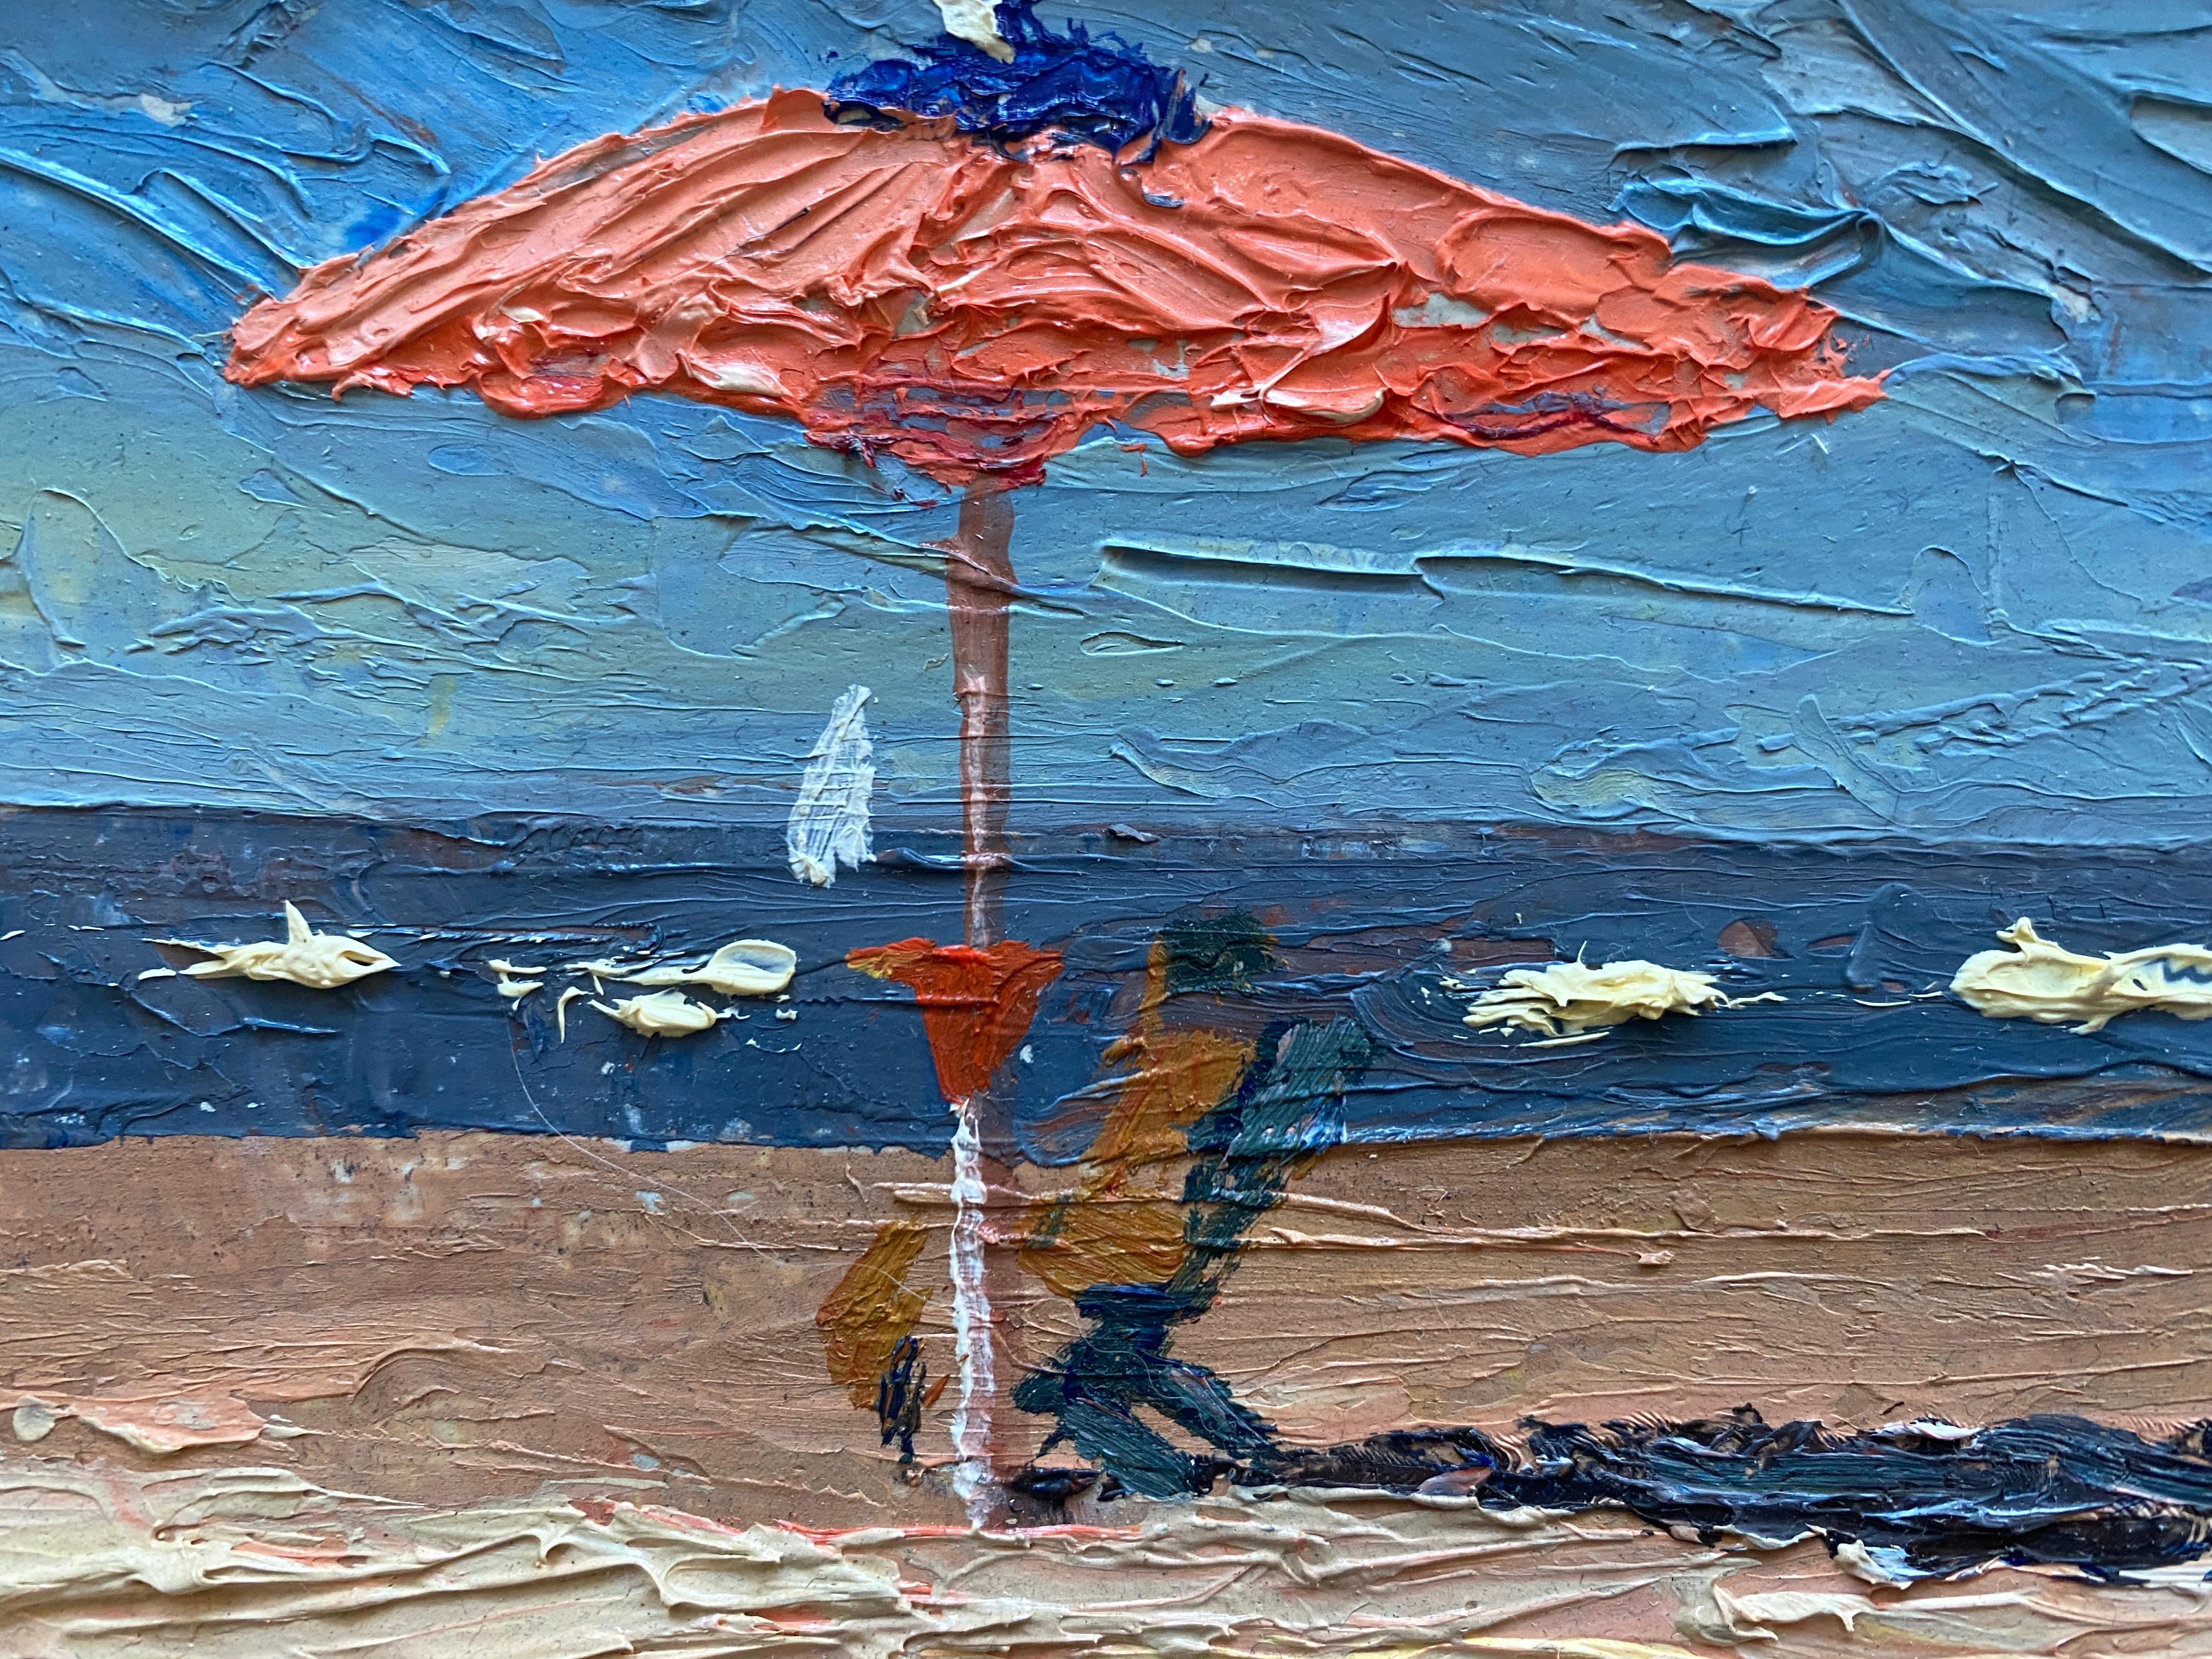 A classic Nelson Holbrook White painting is an Umbrella scene. Painted en plein air in Viareggio, italy, Nelson is drawn to these Orange umbrellas along the coastline. Painted thickly with a palate knife. A single figure sits beneath the umbrella,